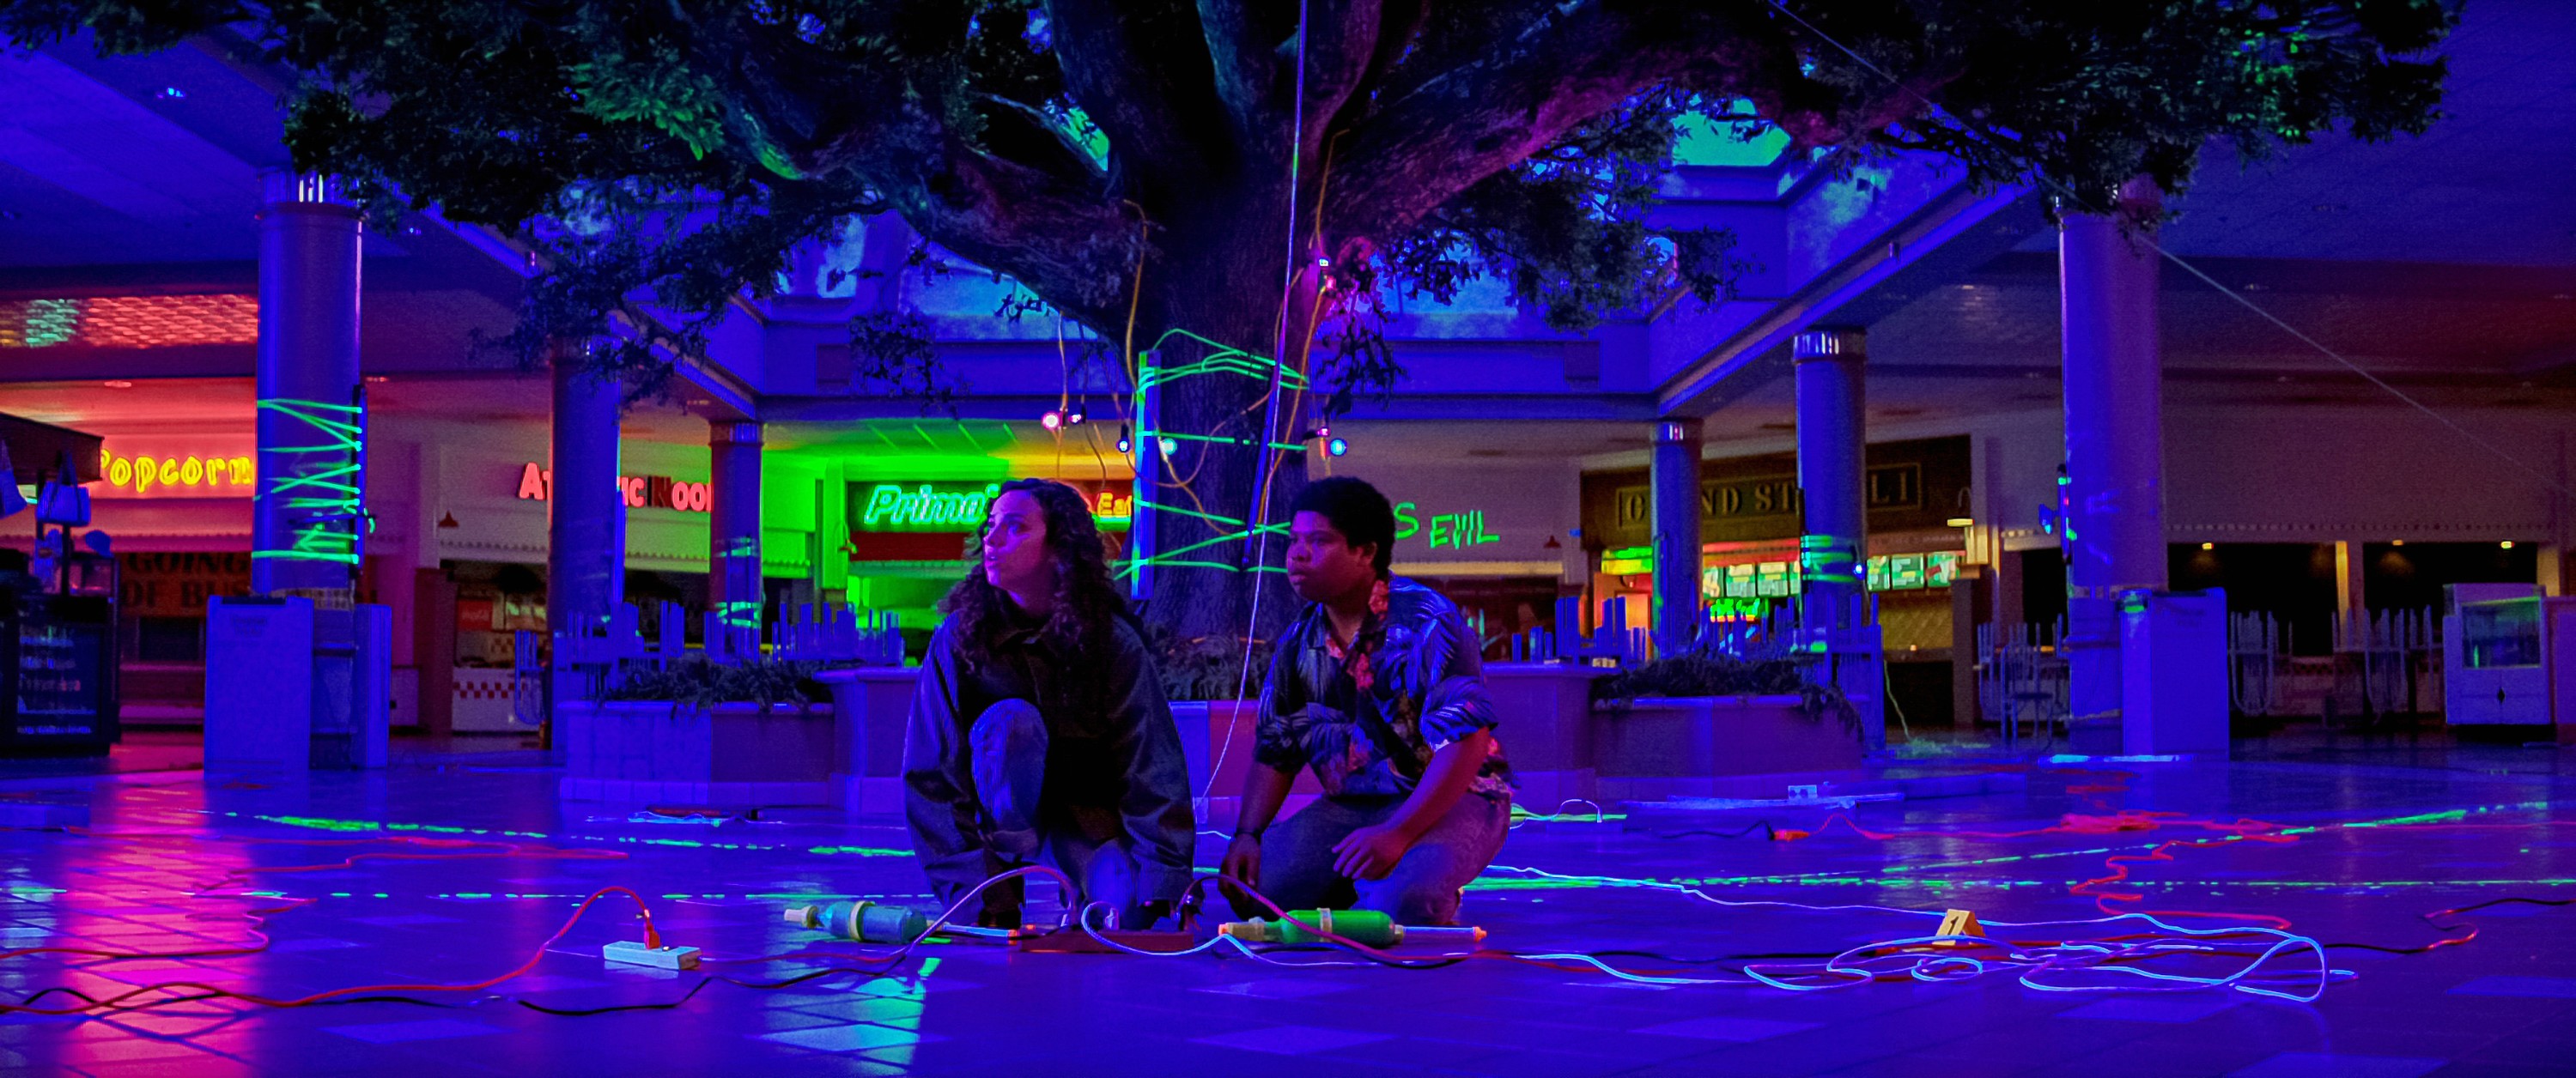 two characters sit in a neon lit mall.